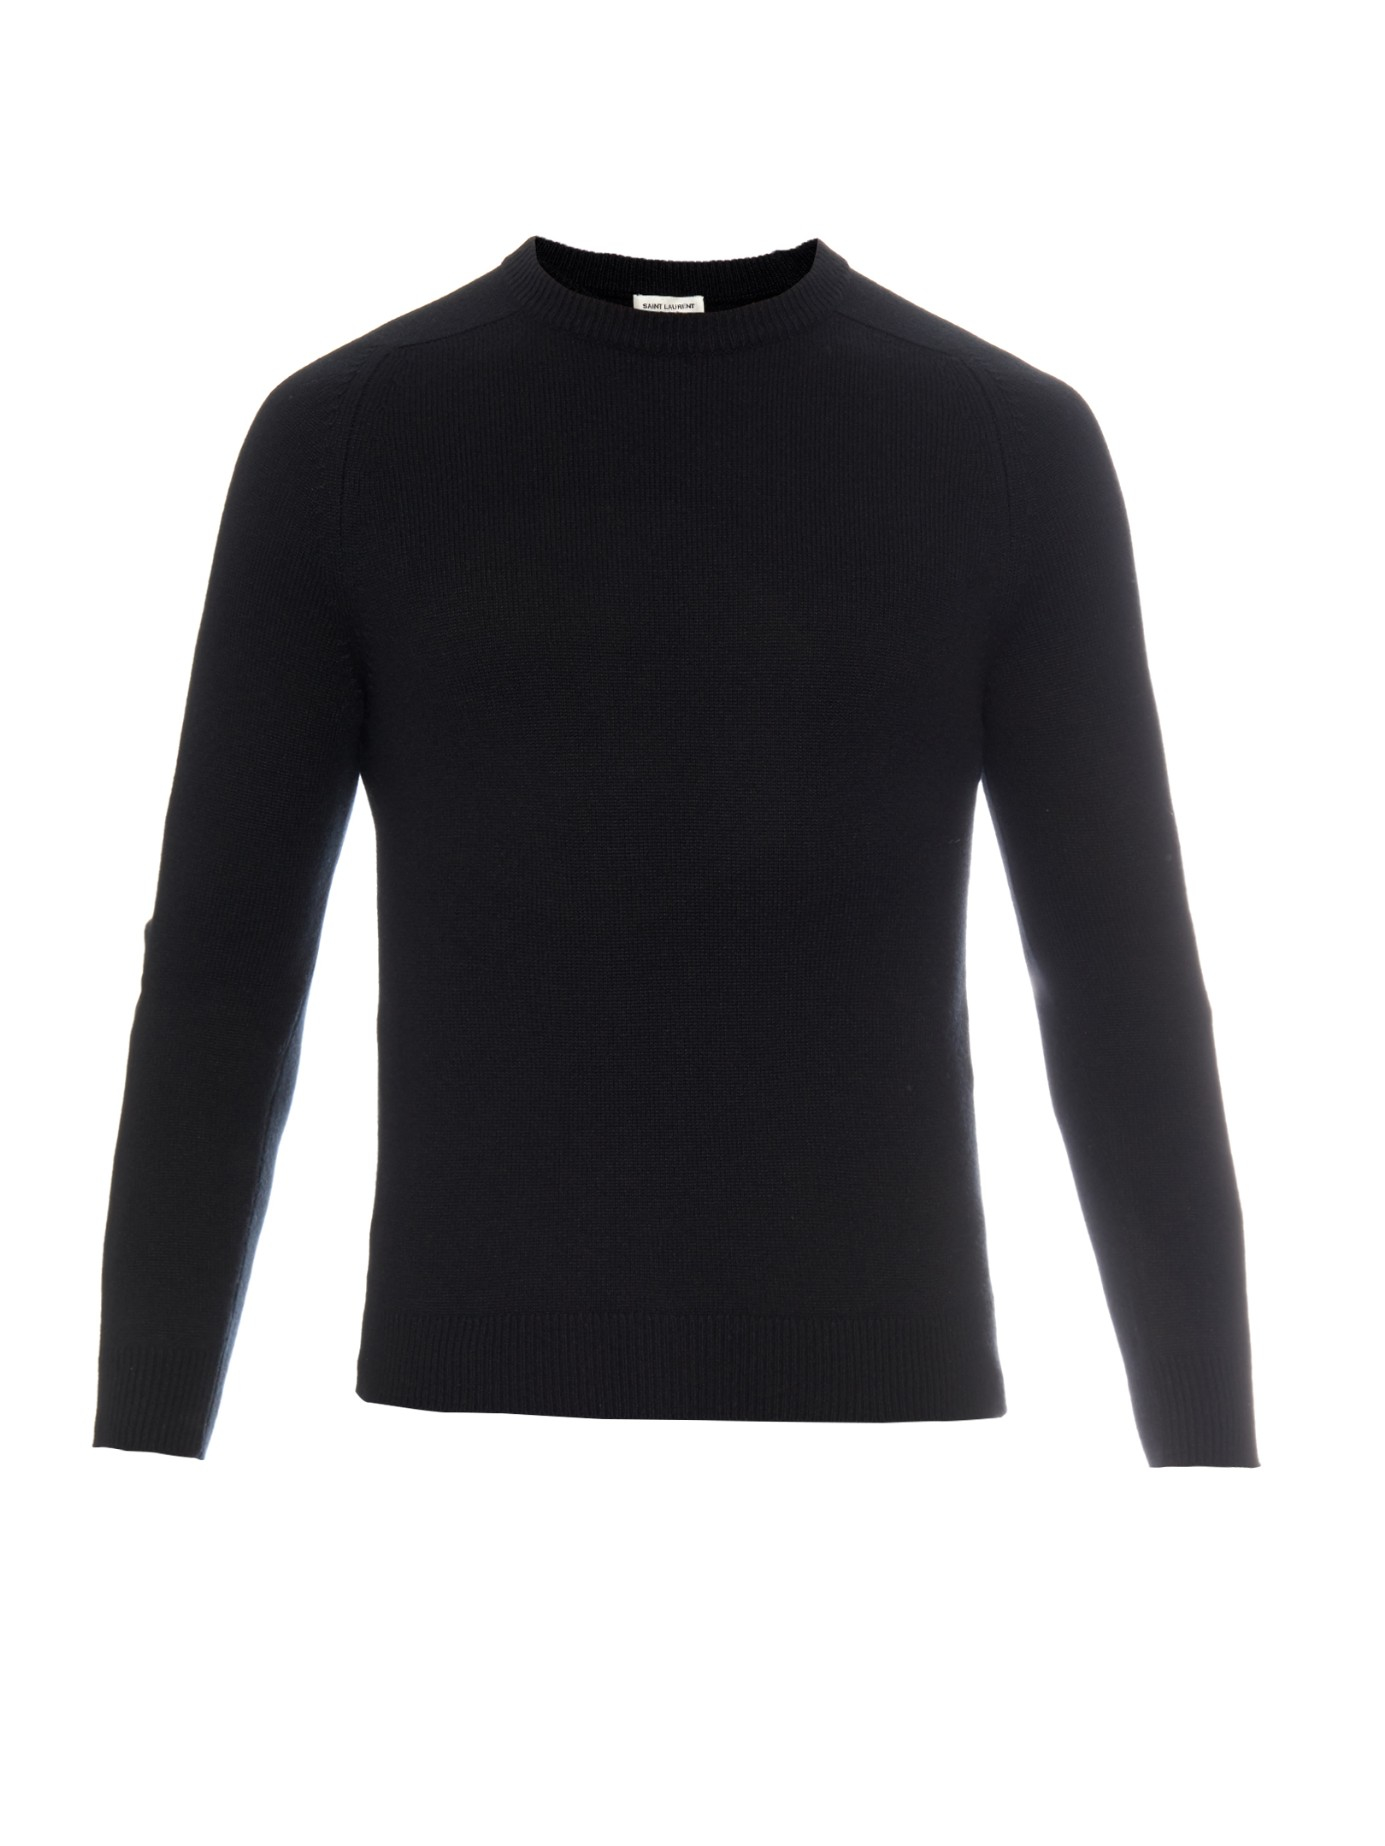 Lyst - Saint Laurent Leather Elbow-patch Cashmere Sweater in Black for Men